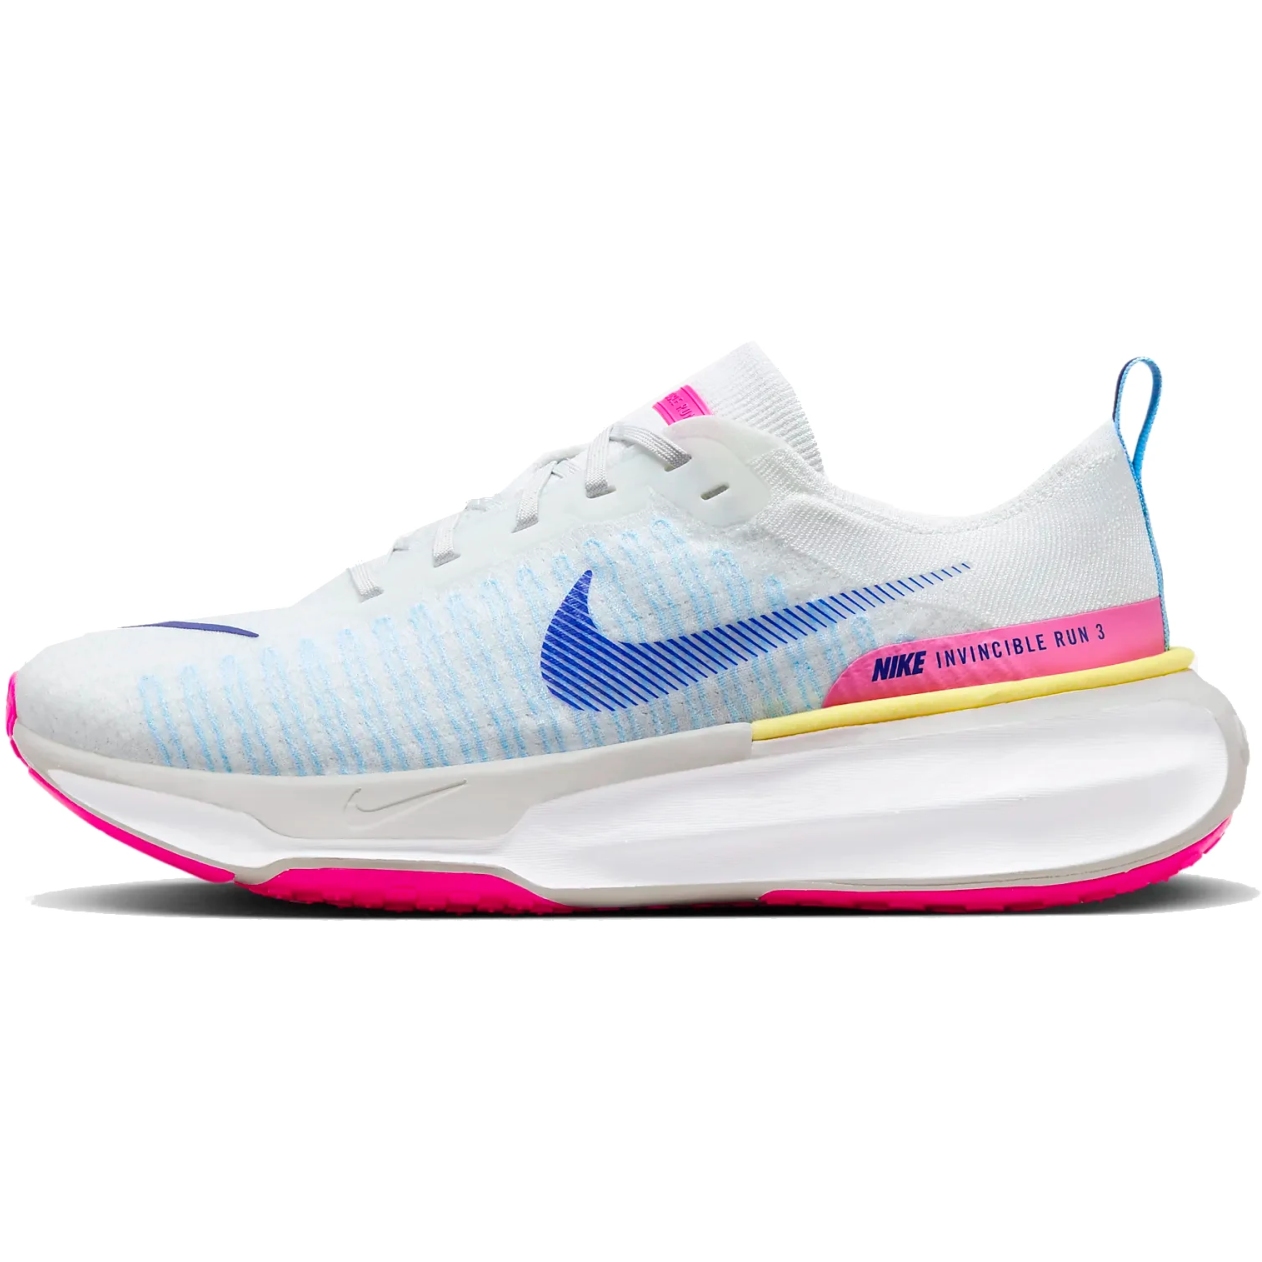 Picture of Nike Invincible 3 Running Shoes Men - white/photon dust/fierce pink/deep royal blue DR2615-105